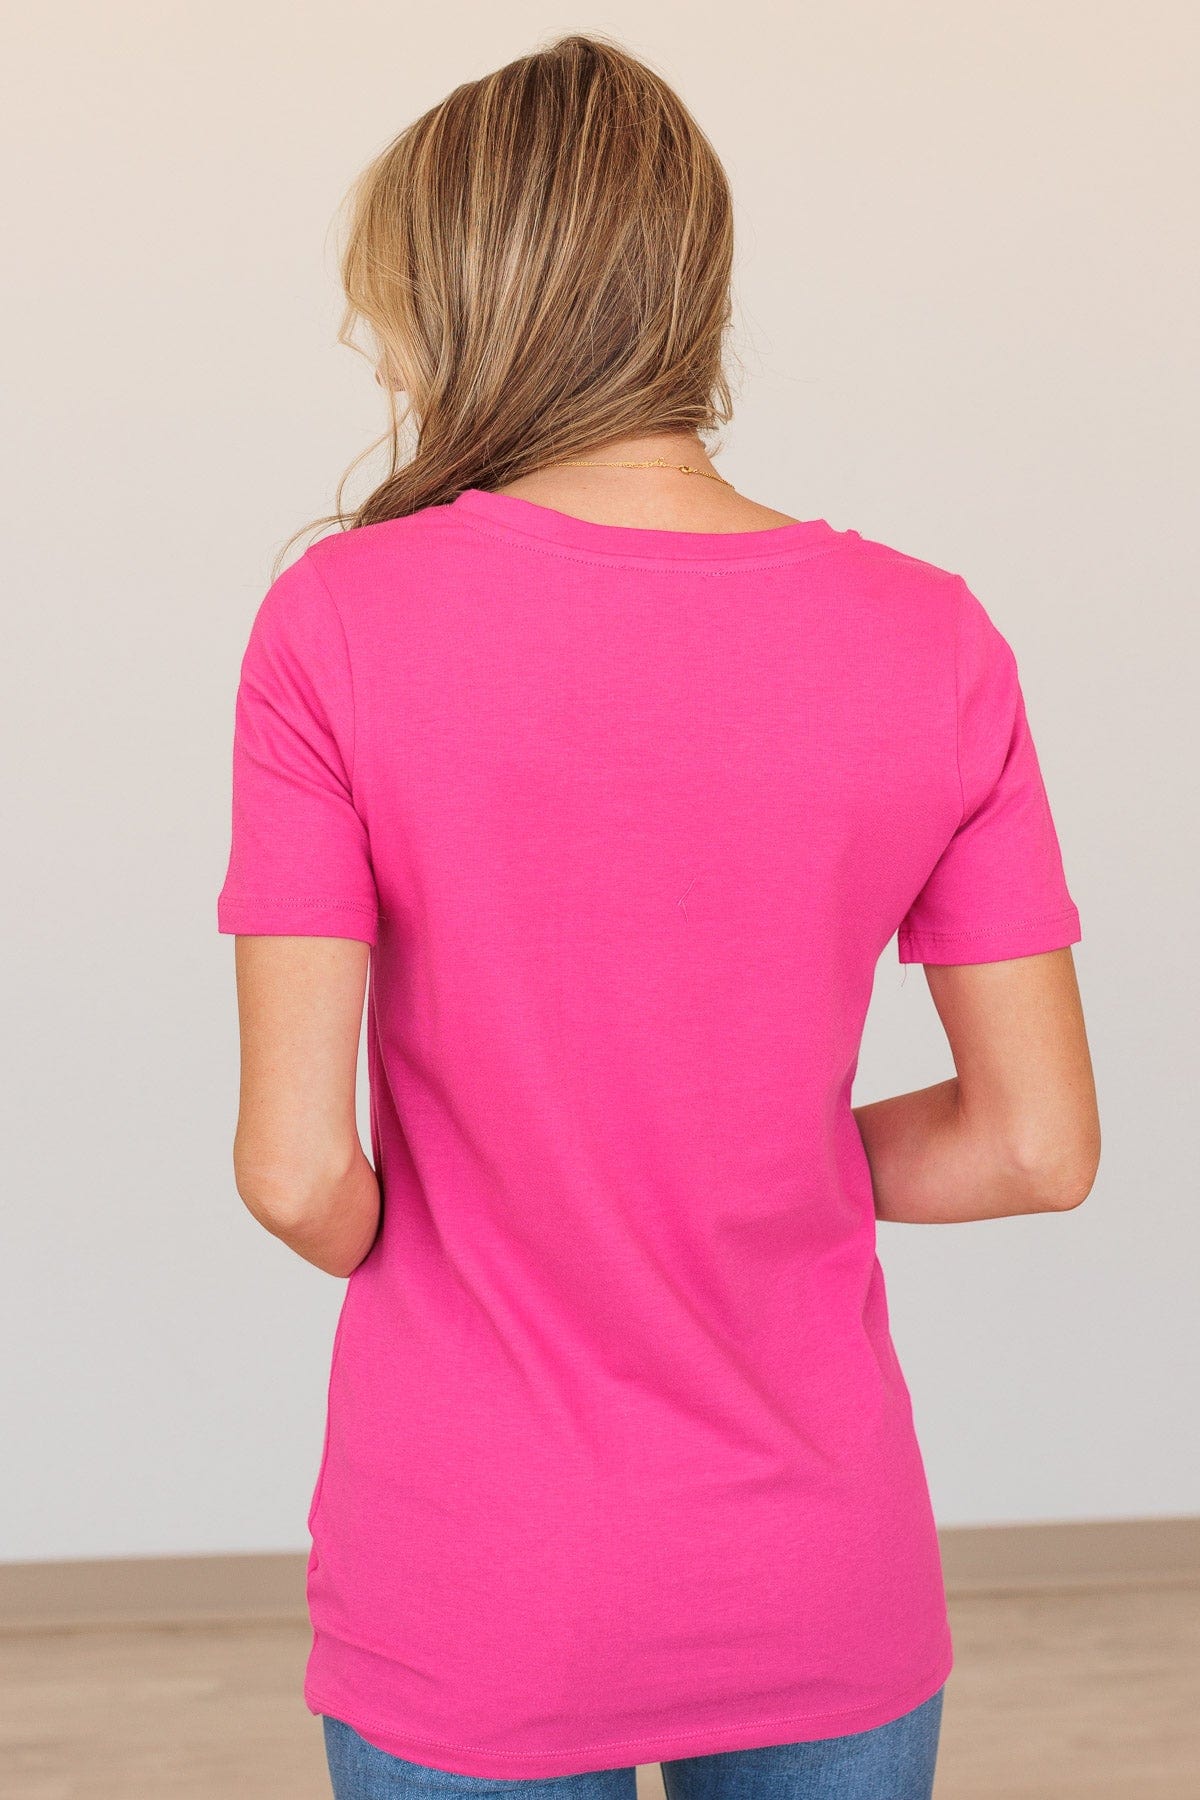 From The Moment We Met V-Neck Tee- Hot Pink